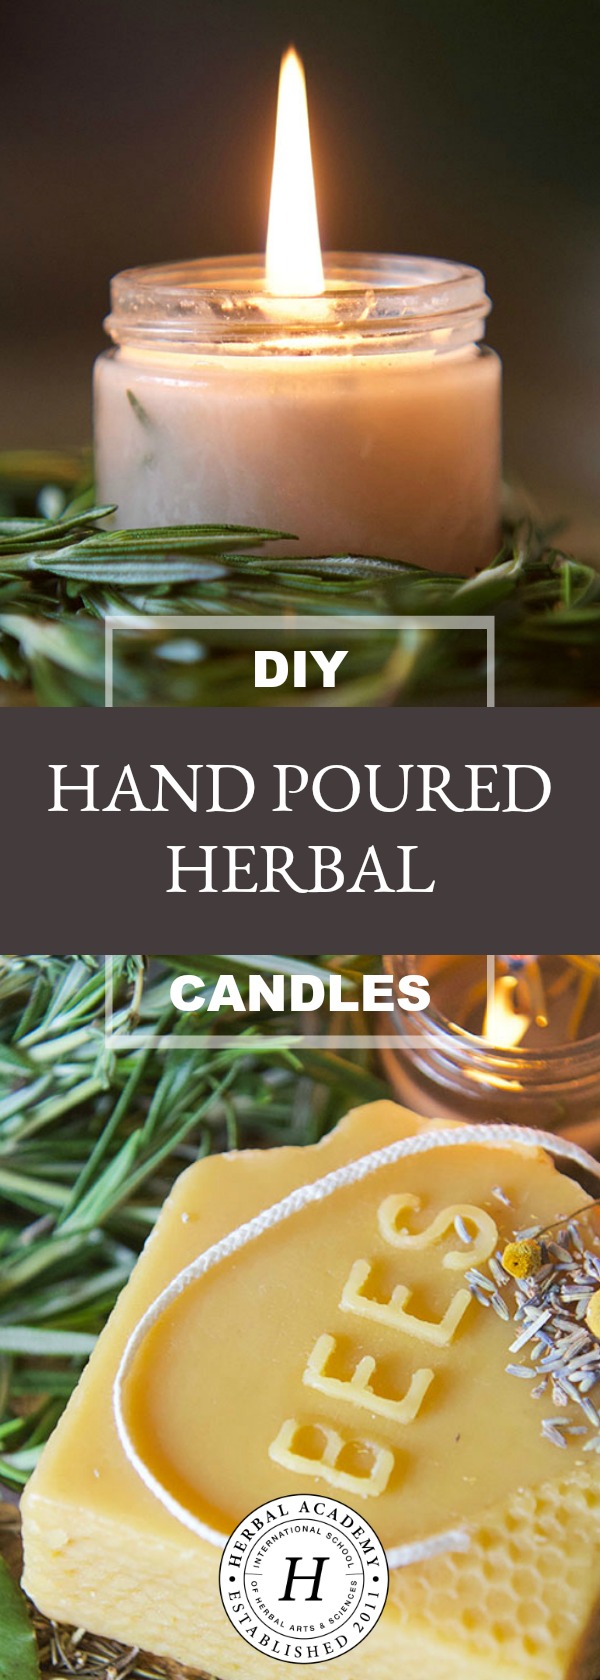 DIY Hand Poured Herbal Candles | Herbal Academy | Are you looking for a simple way to enjoy the ambiance of candlelight without all the chemicals? Try making your own hand poured herbal candles instead!